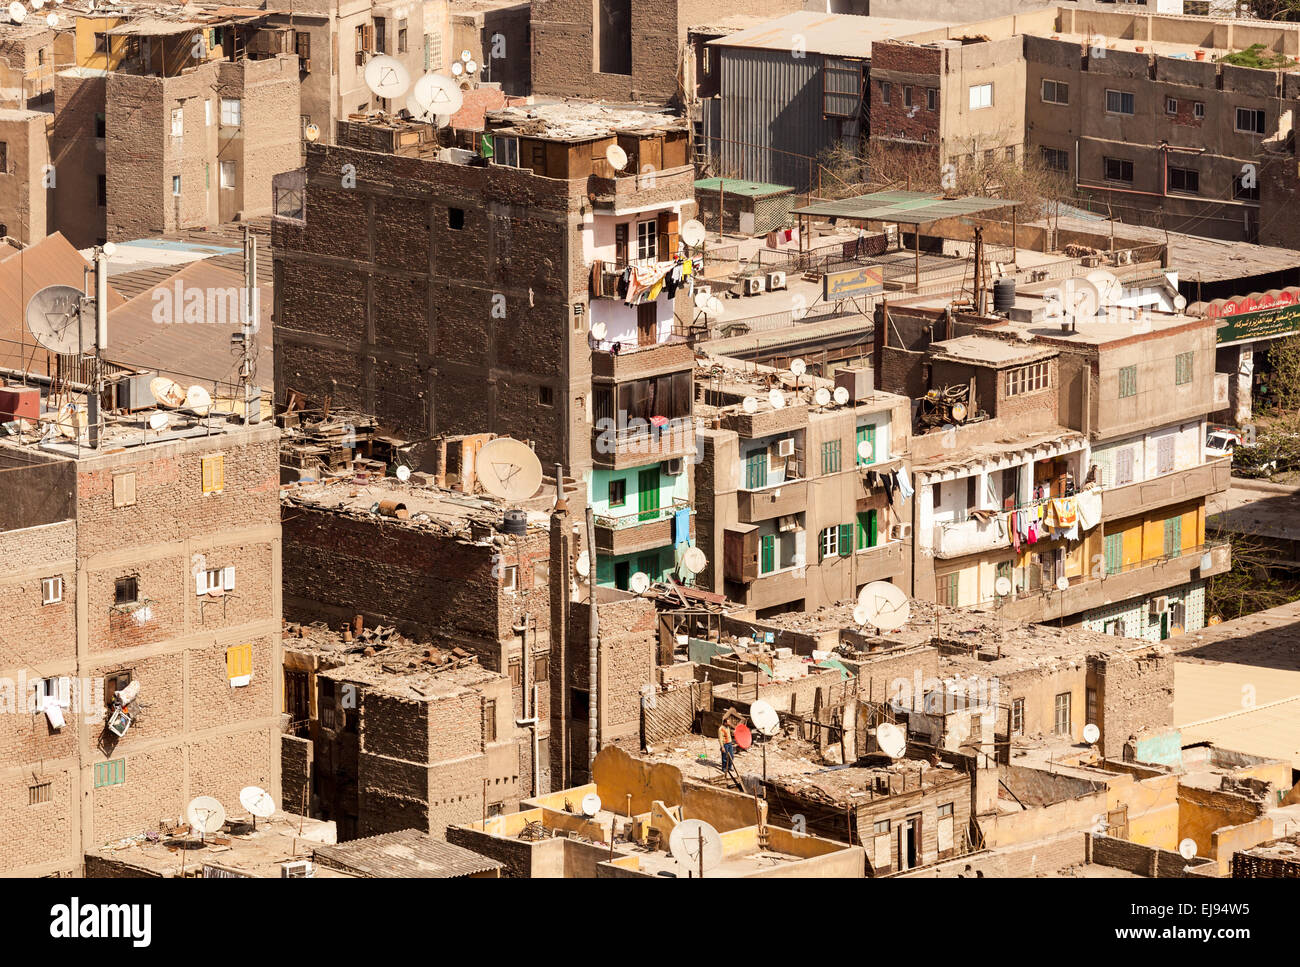 Slum roofs in Cairo Egypt showing trash Stock Photo